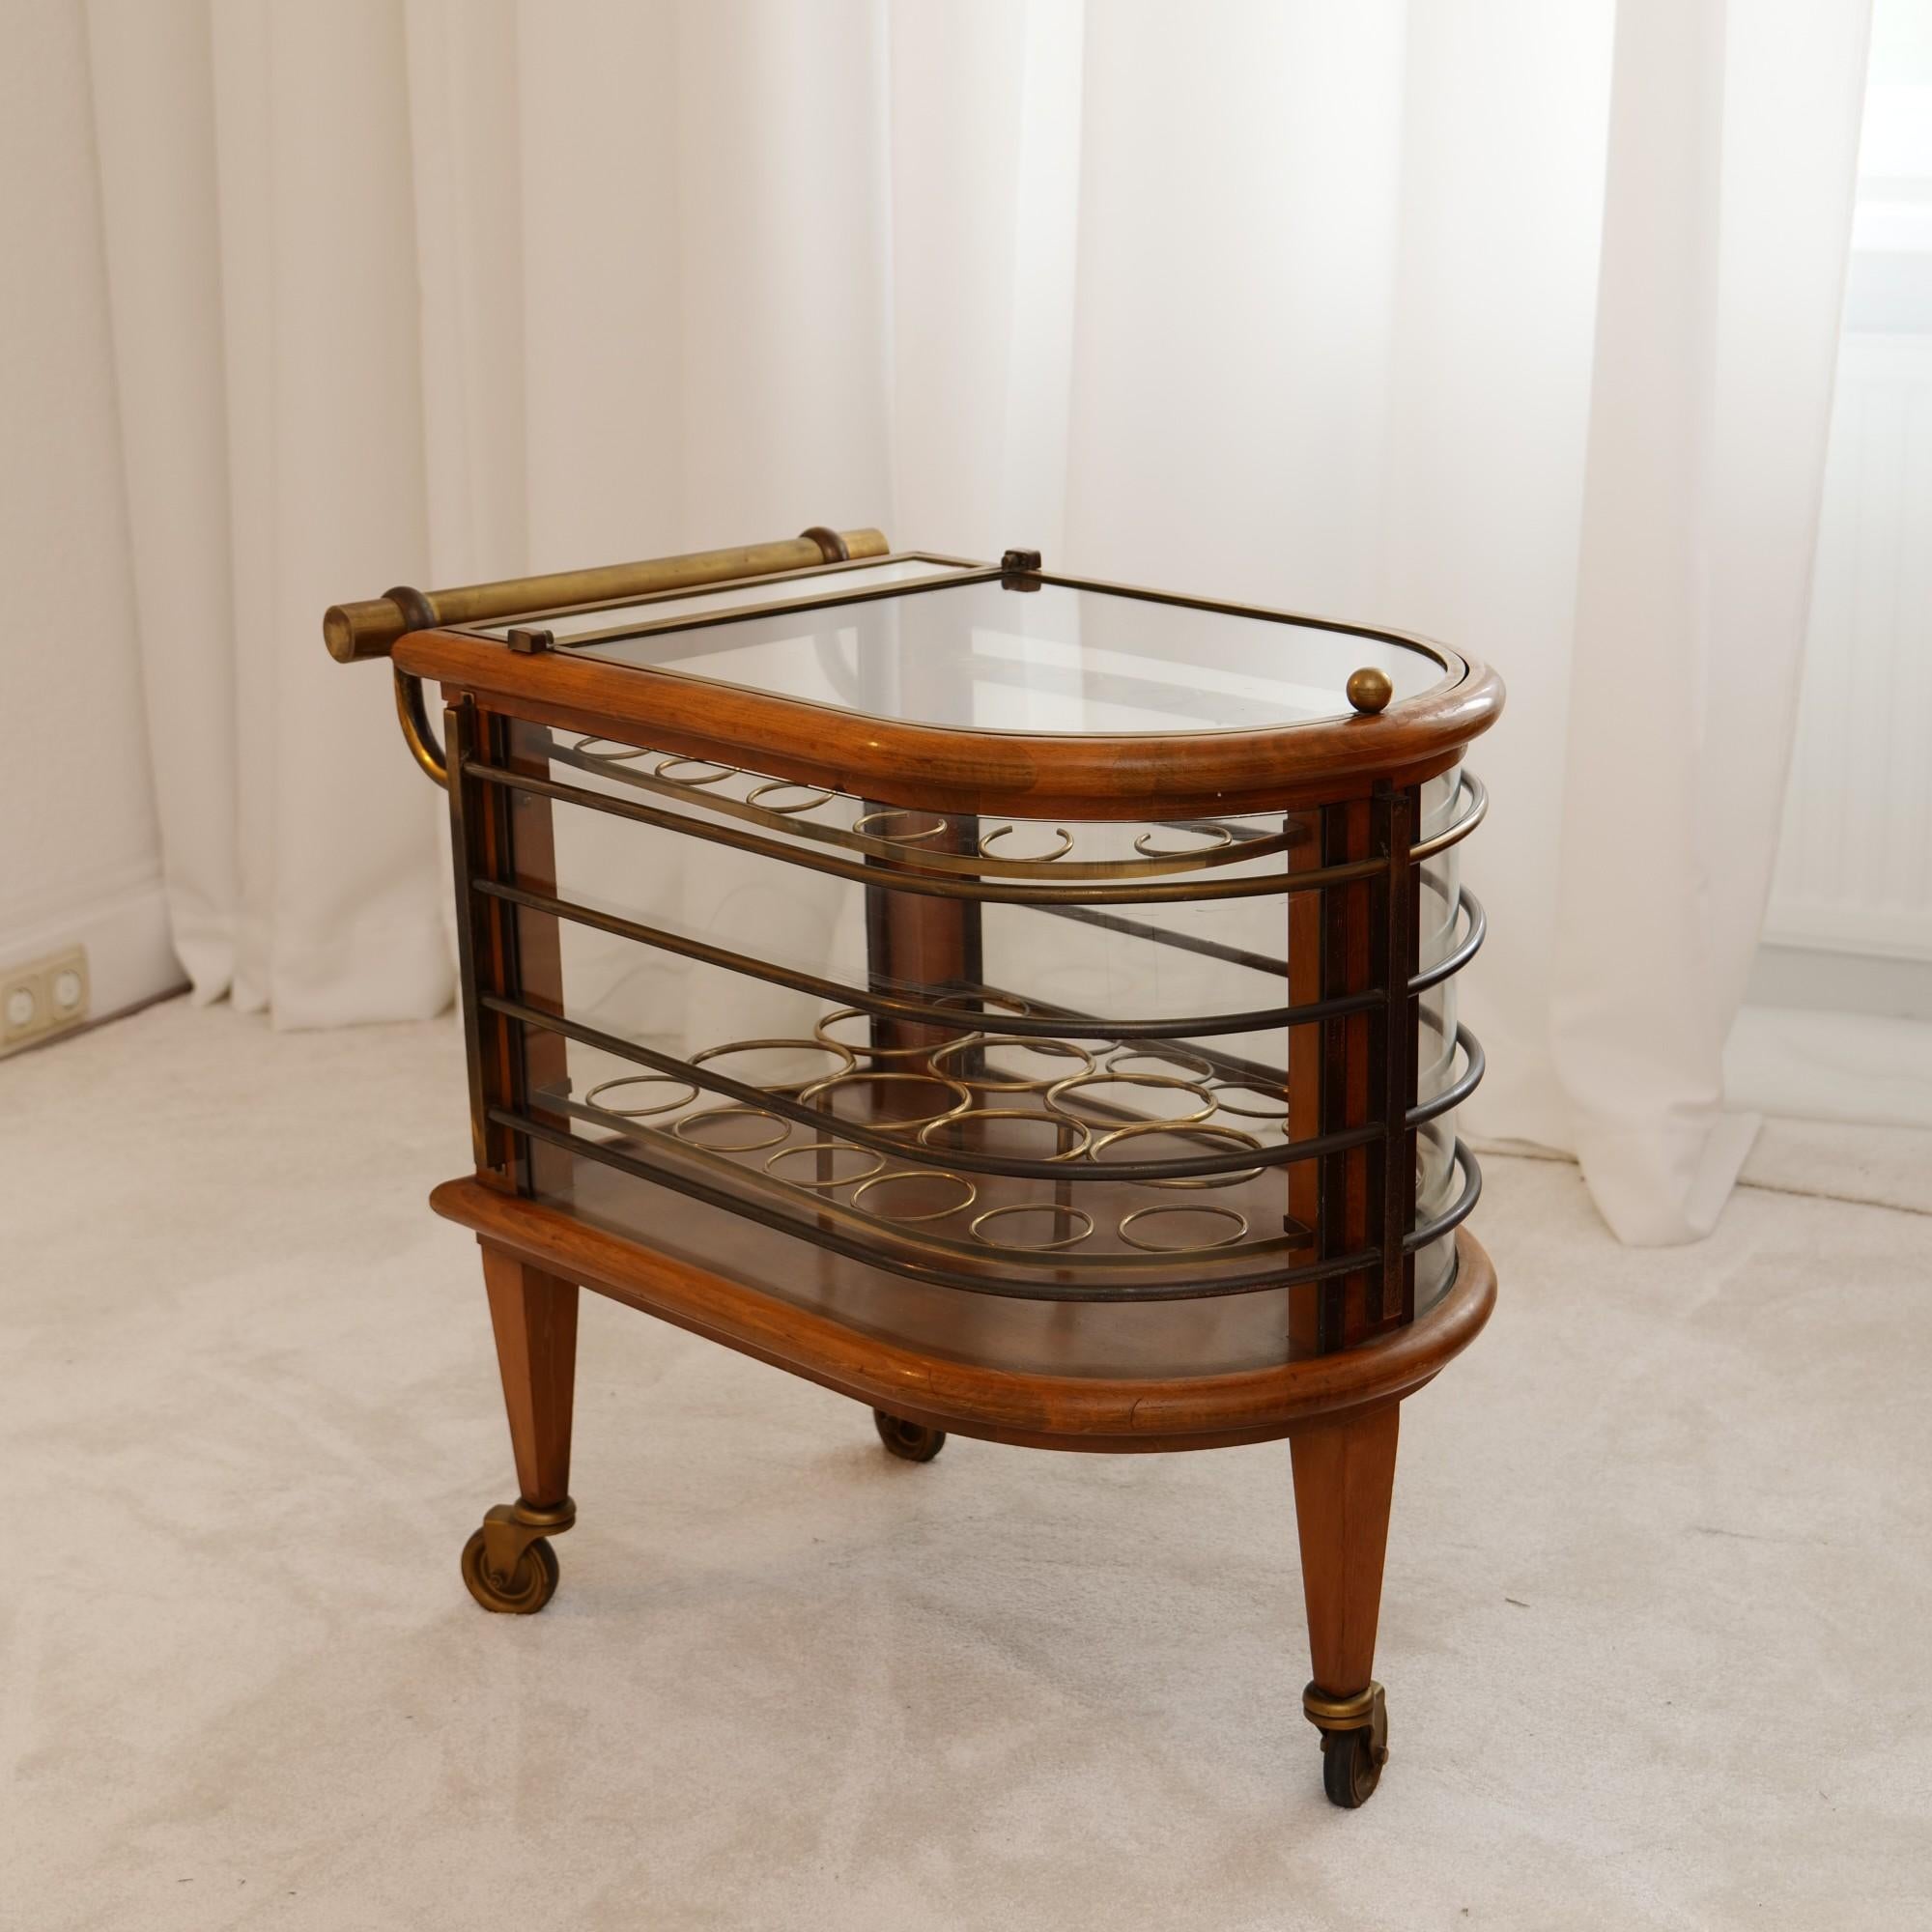 - rare art deco streamline bar cart
- 1940s french by Louis Sognot
- handcrafted by french artisans 
- made of curved glass and wood, brass and mirror
- original and untouched condition
- beautiful patina

72 cm x 60 cm x 42 cm
102 cm depth when